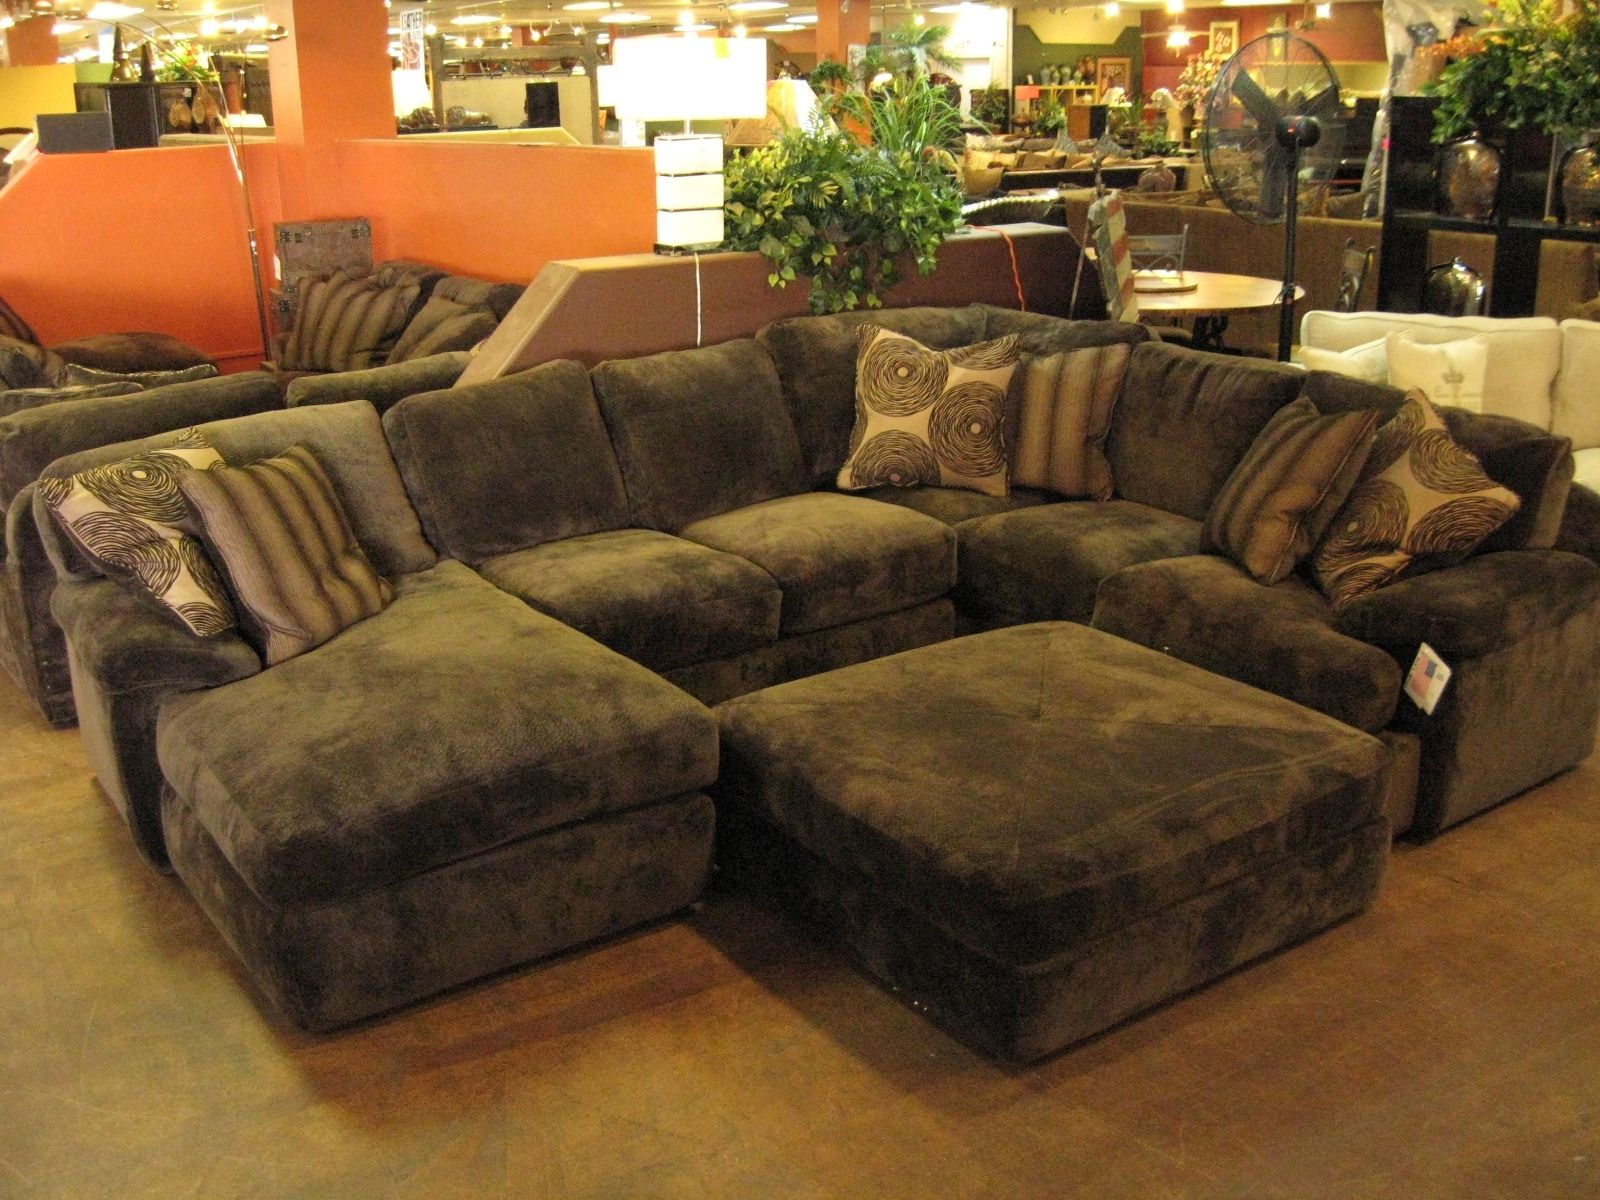 Sofa : 2 Piece Sectional Sofa Where To Buy Sectionals Small Intended For Sectional Sofas With Chaise And Ottoman (View 5 of 15)